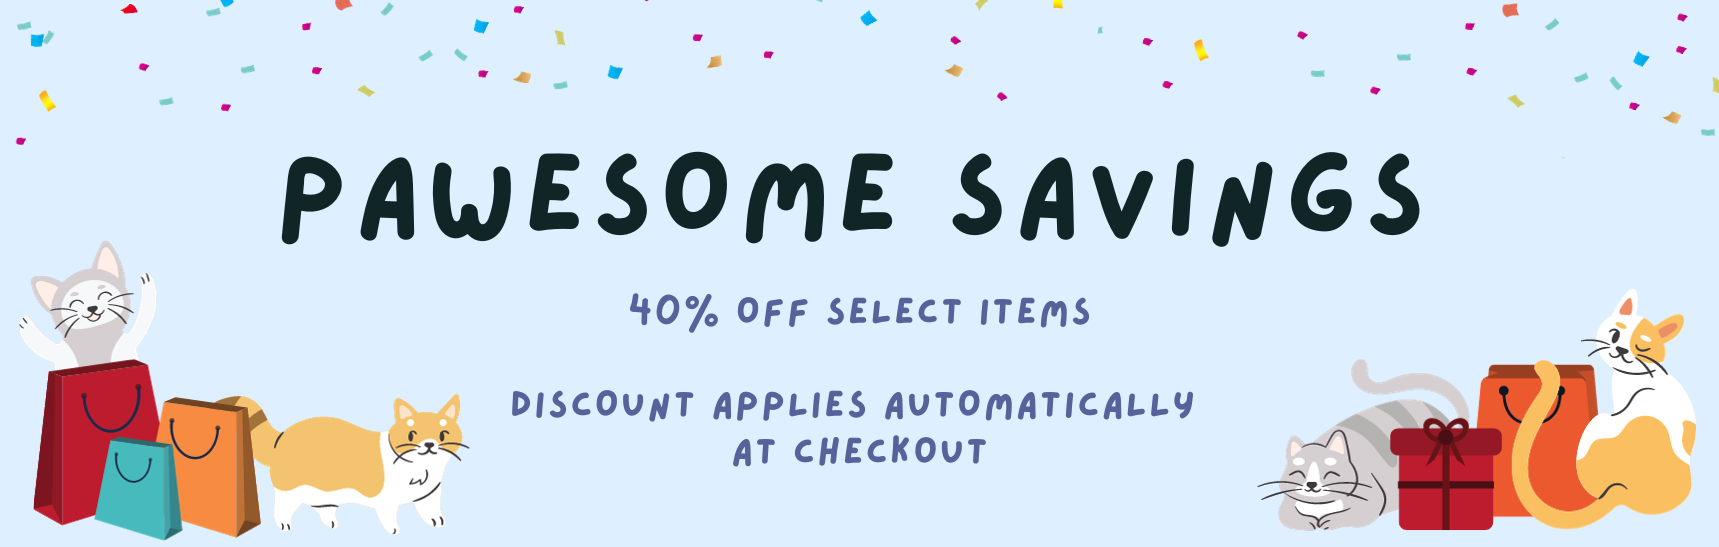 PAWESOME SAVINGS - 40% OFF SELECT ITEMS. Discount applies automatically at checkout!